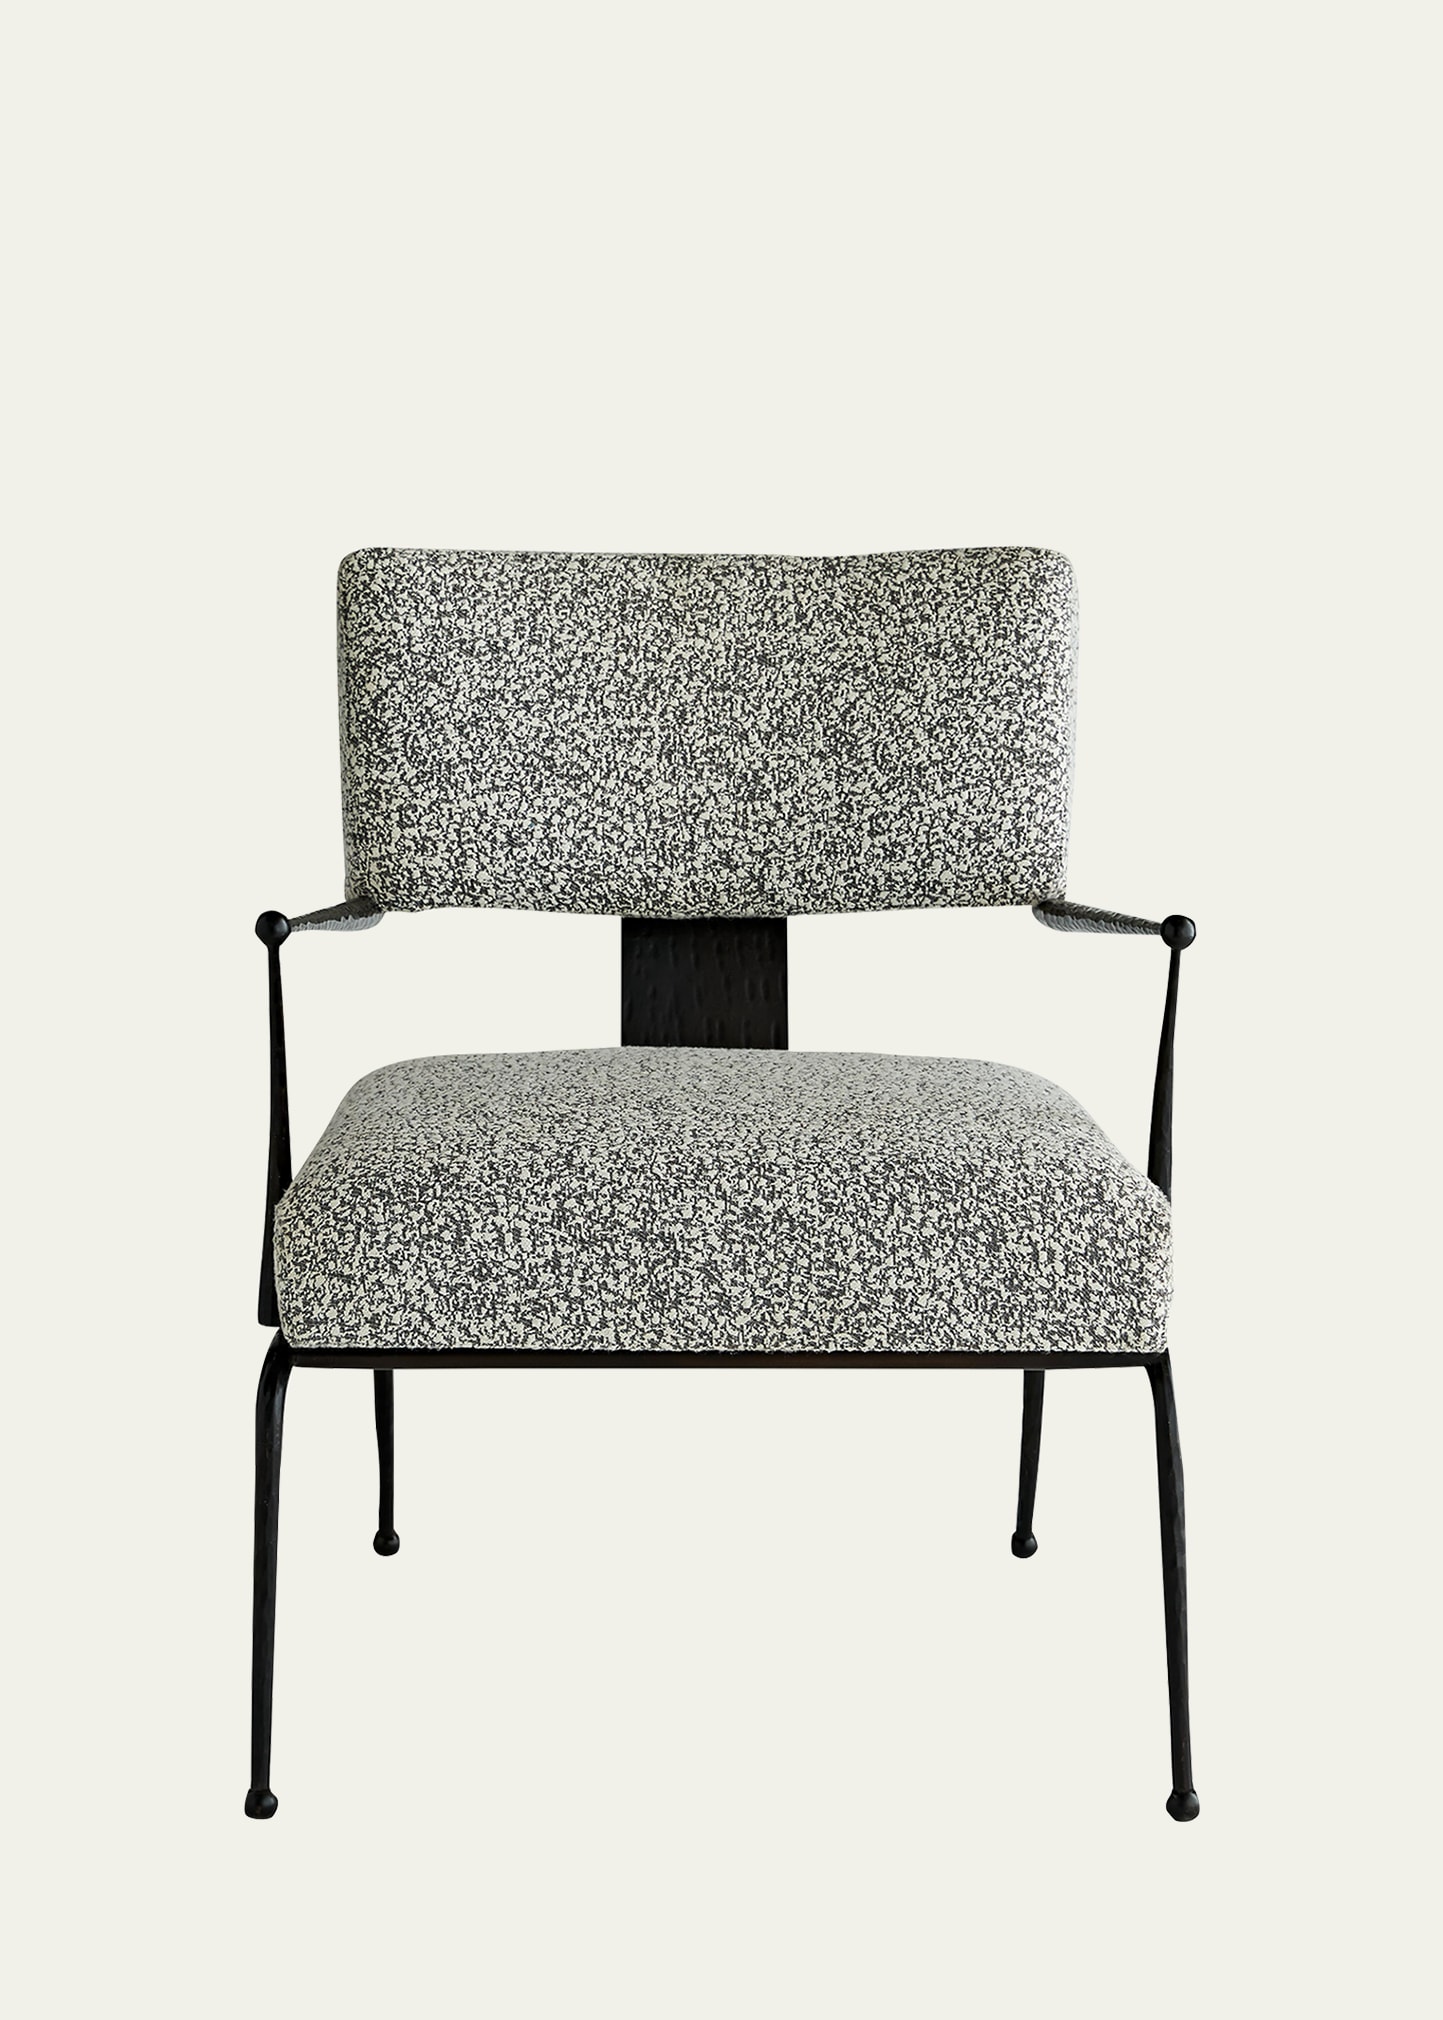 Arteriors Wallace Pitch Textured Chair